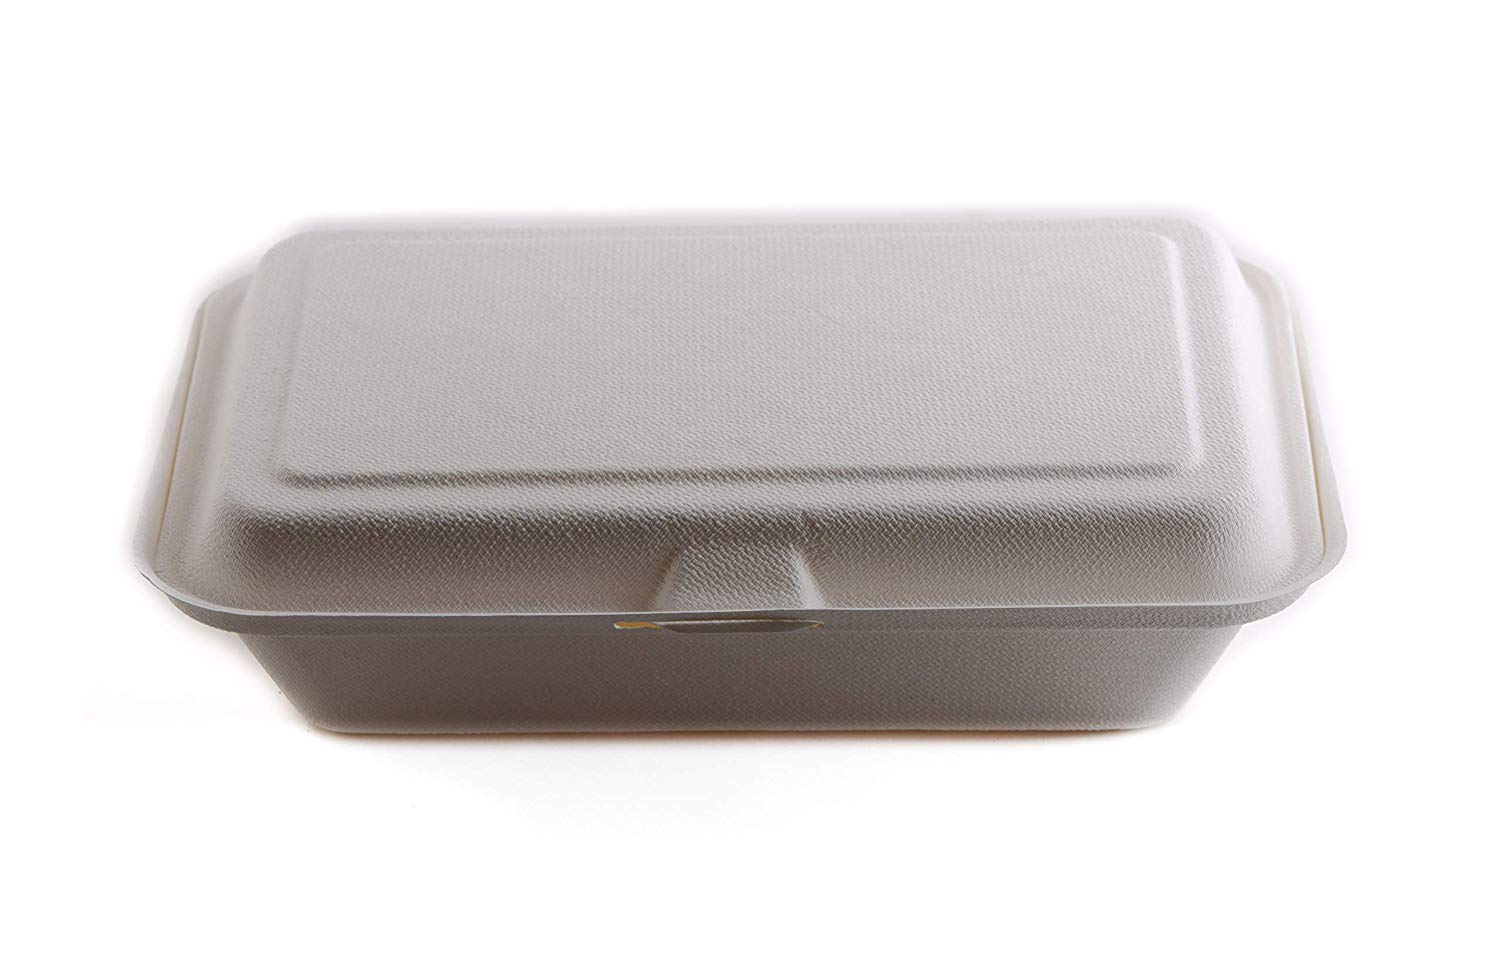 Compostable Biodegradable Take Out Food Containers with Clamshell Hinged Lid Microwaveable, Disposable Takeout Box to Carry Meals Togo [6x6, 9x9, 9x6]